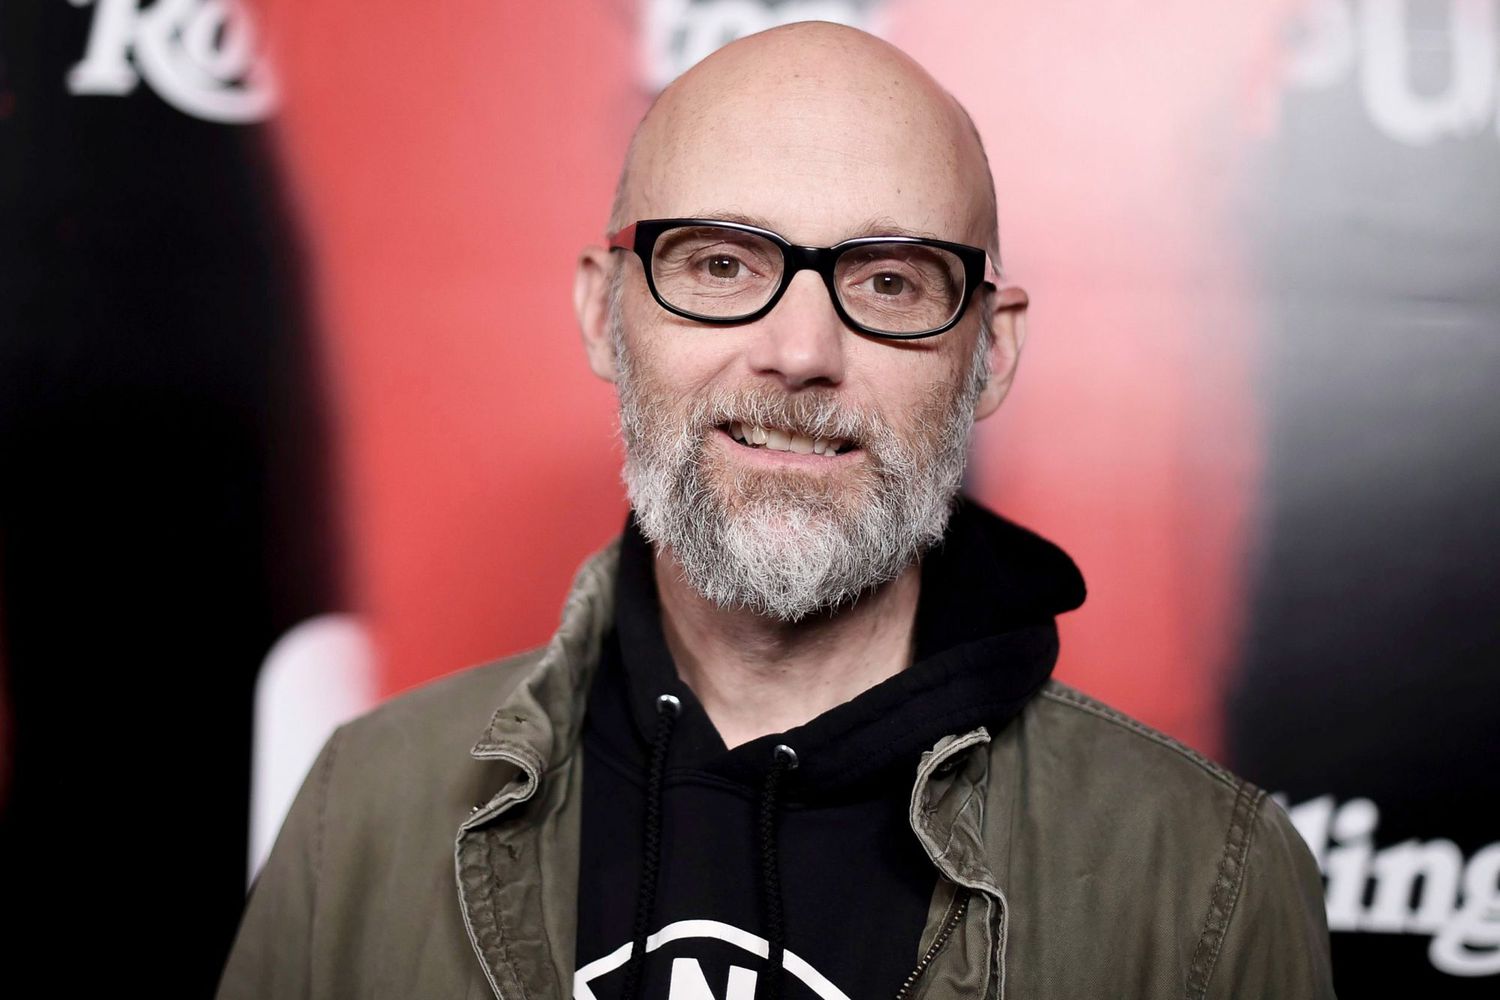 <p>"I actually do intermittent fasting every day," the singer told Us in October 2018. "I try minimum 12 hours, usually 16. Basically, I just don't eat dinner."</p>
                            <p>Moby admitted that it's strange for him to be so restrictive since he owns a restaurant, Little Pine, in L.A, but he still makes it work: "It's really absurd, I go out to dinner with my friends and I just don't eat."</p>
                            <p>Regardless, Moby said it's worth it. "I like it because that way, during the day, I can be really indulgent," he added. "Then skipping dinner, there is sort of, like, a martyrdom quality to it."</p>
                            